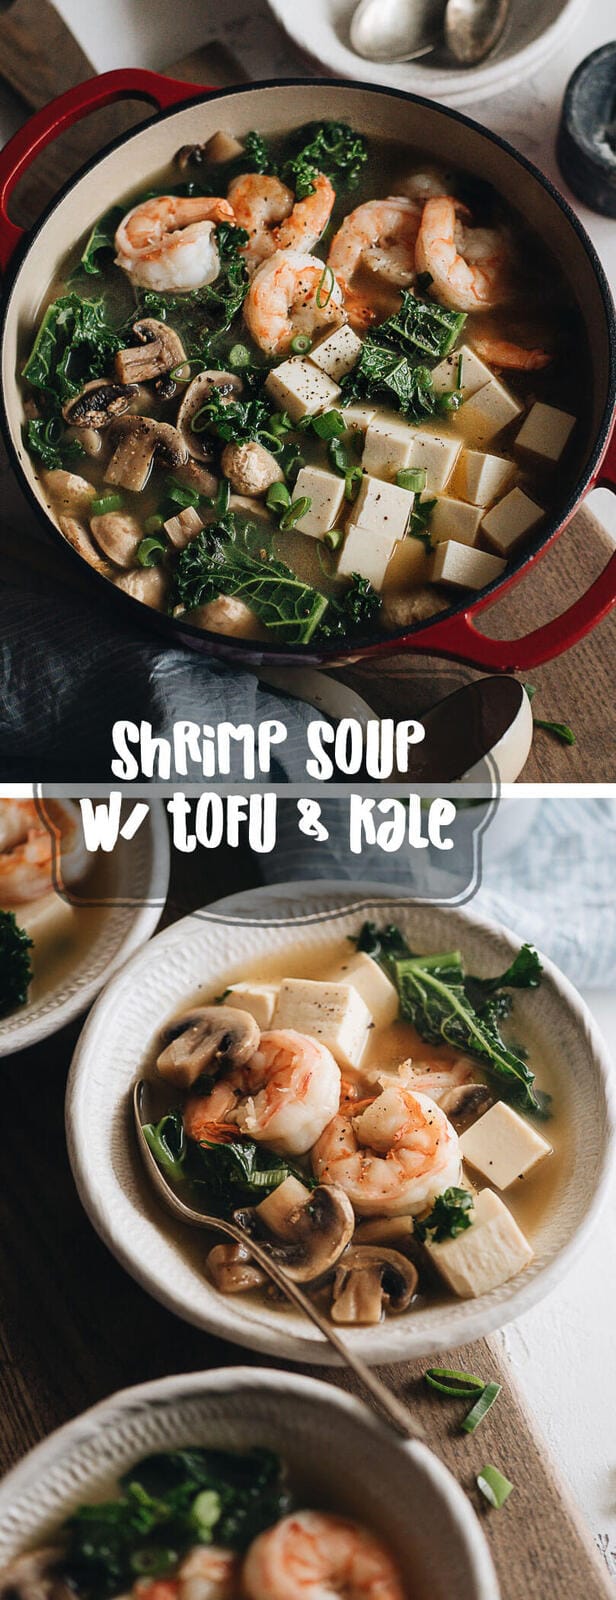 15-Minute Shrimp Soup with Tofu and Kale - A super easy, healthy, and hearty one-pot soup that is low-carb and packed with lean protein. So fast to make and satisfying enough to serve as a main dish. #glutenfree #shrimp #soup #healthy #superfood #recipes